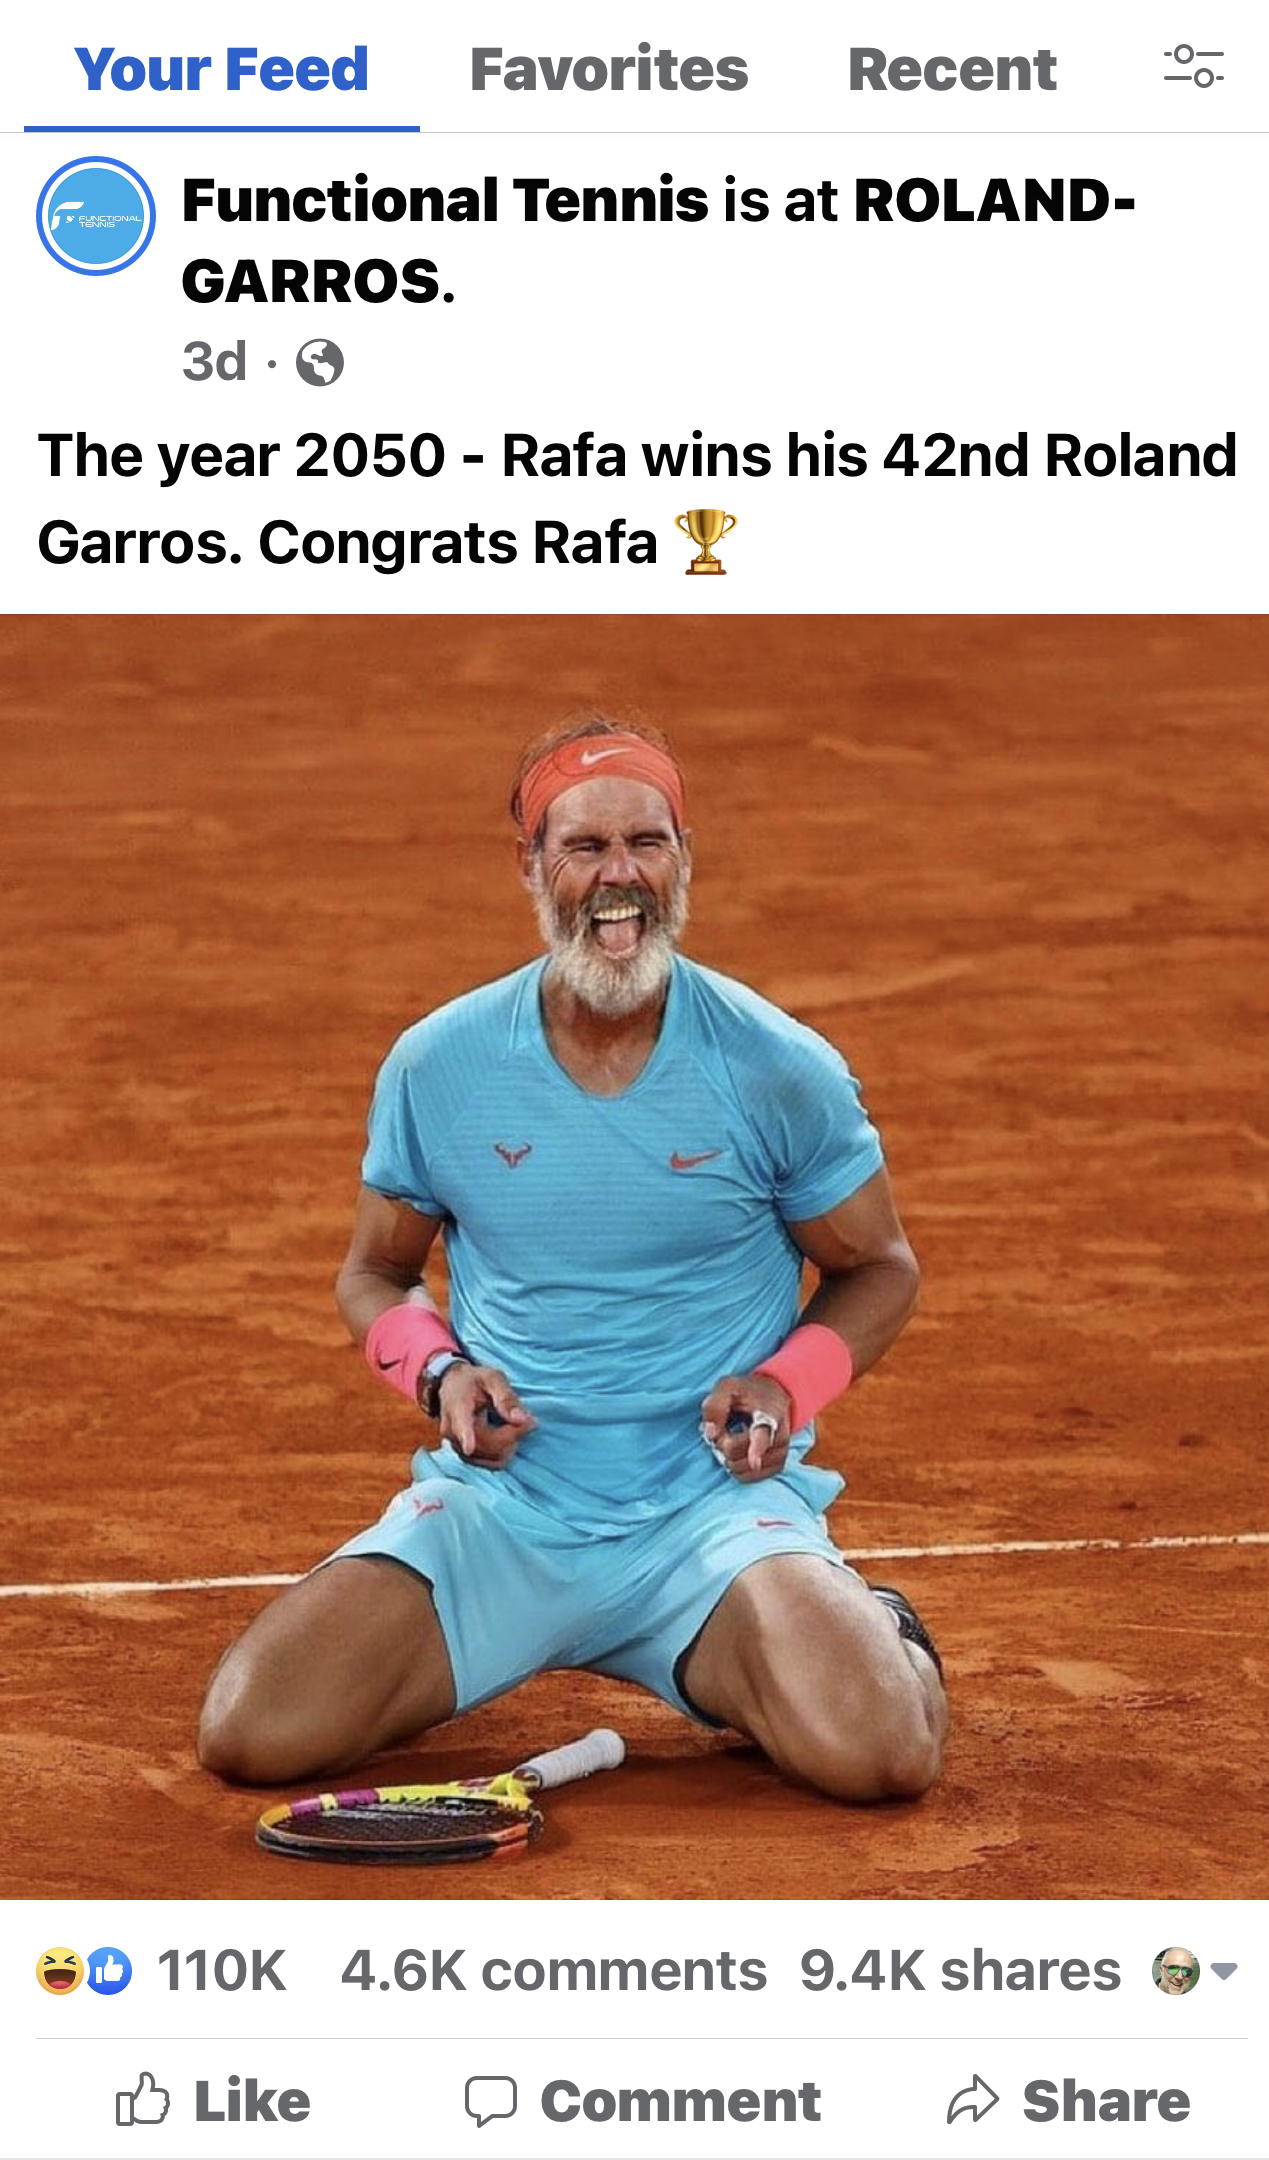 Your Feed Favorites Recent

Functional Tennis is at ROLAND-
GARROS.
3d-Q

The year 2050 - Rafa wins his 42nd Roland
Garros. Congrats Rafa ¥V’

#0 110K 4.6K comments 9.4K shares @~

 

5 Like (J Comment ~ Share